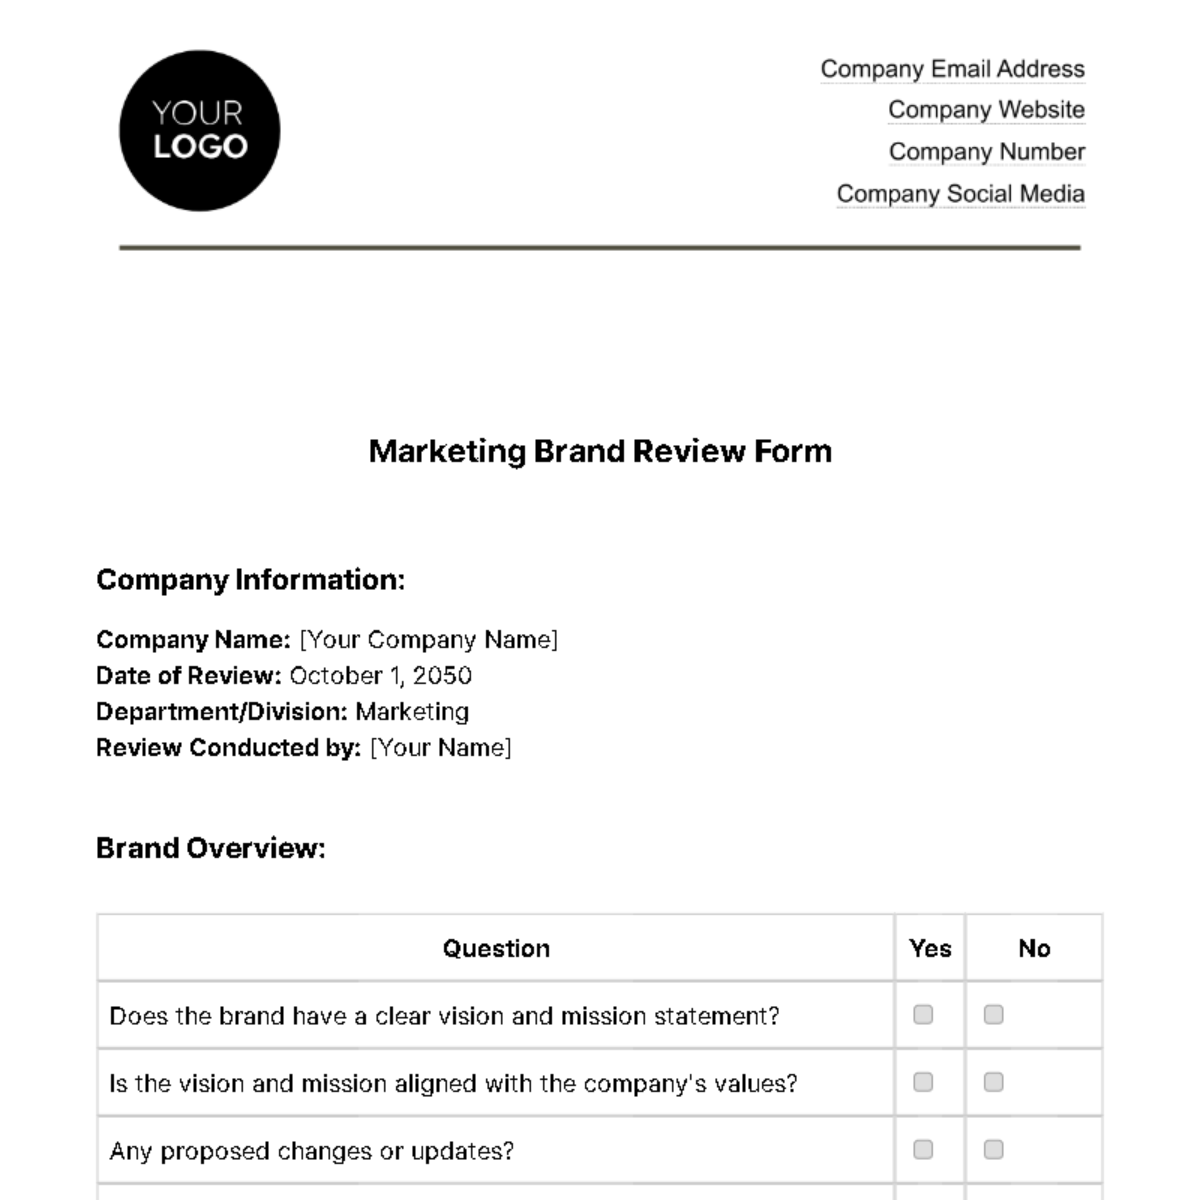 Marketing Brand Review Form Template